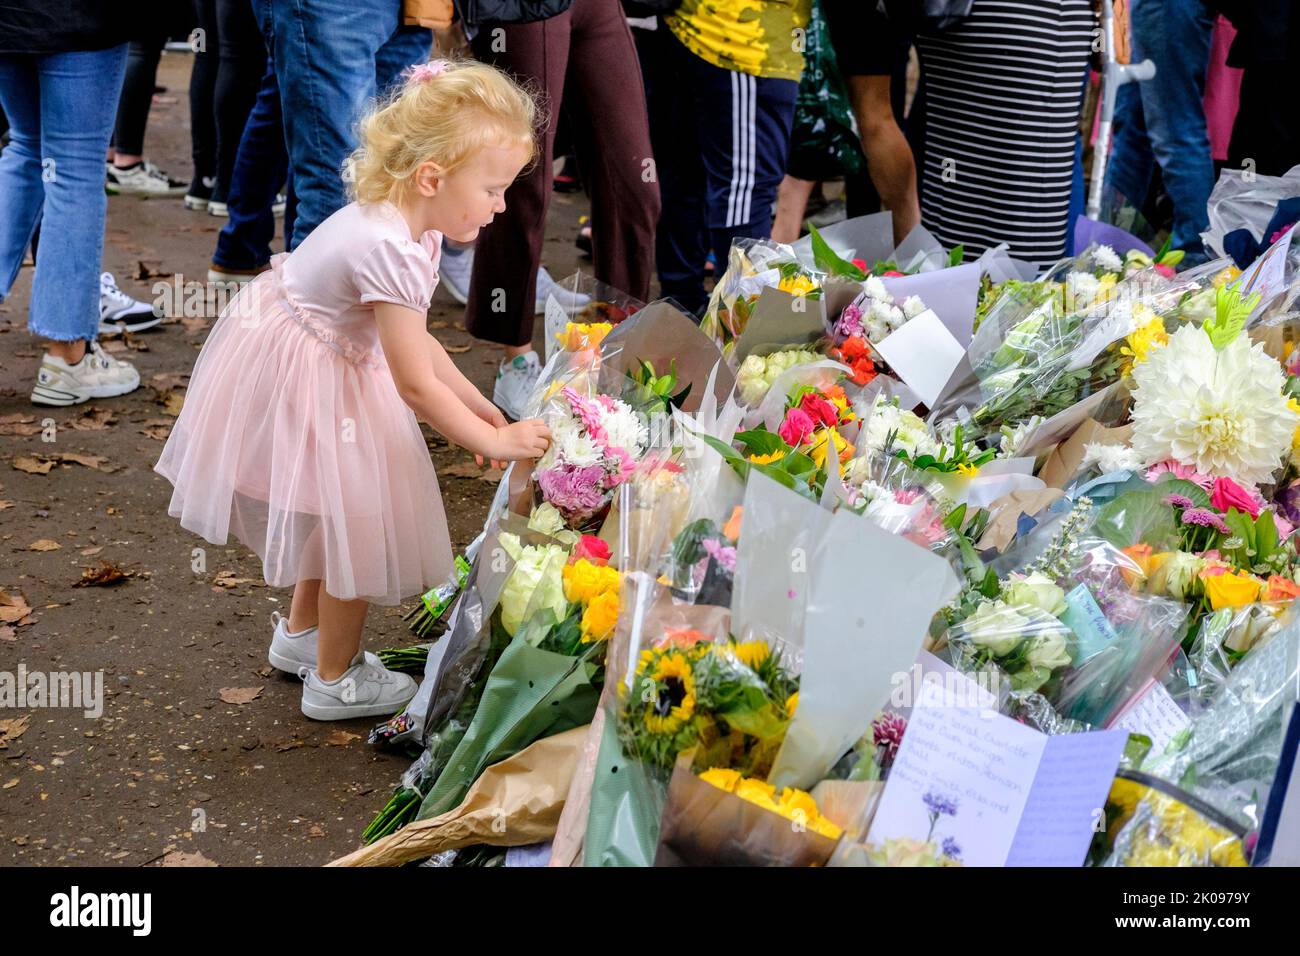 London UK, 10th September 2022. Thousands of floral tributes to Her Majesty Queen Elizabeth II are laid in Green Park, many of them accompanied by messages from adults and children. A young child lays a bouquet of flowers. Stock Photo